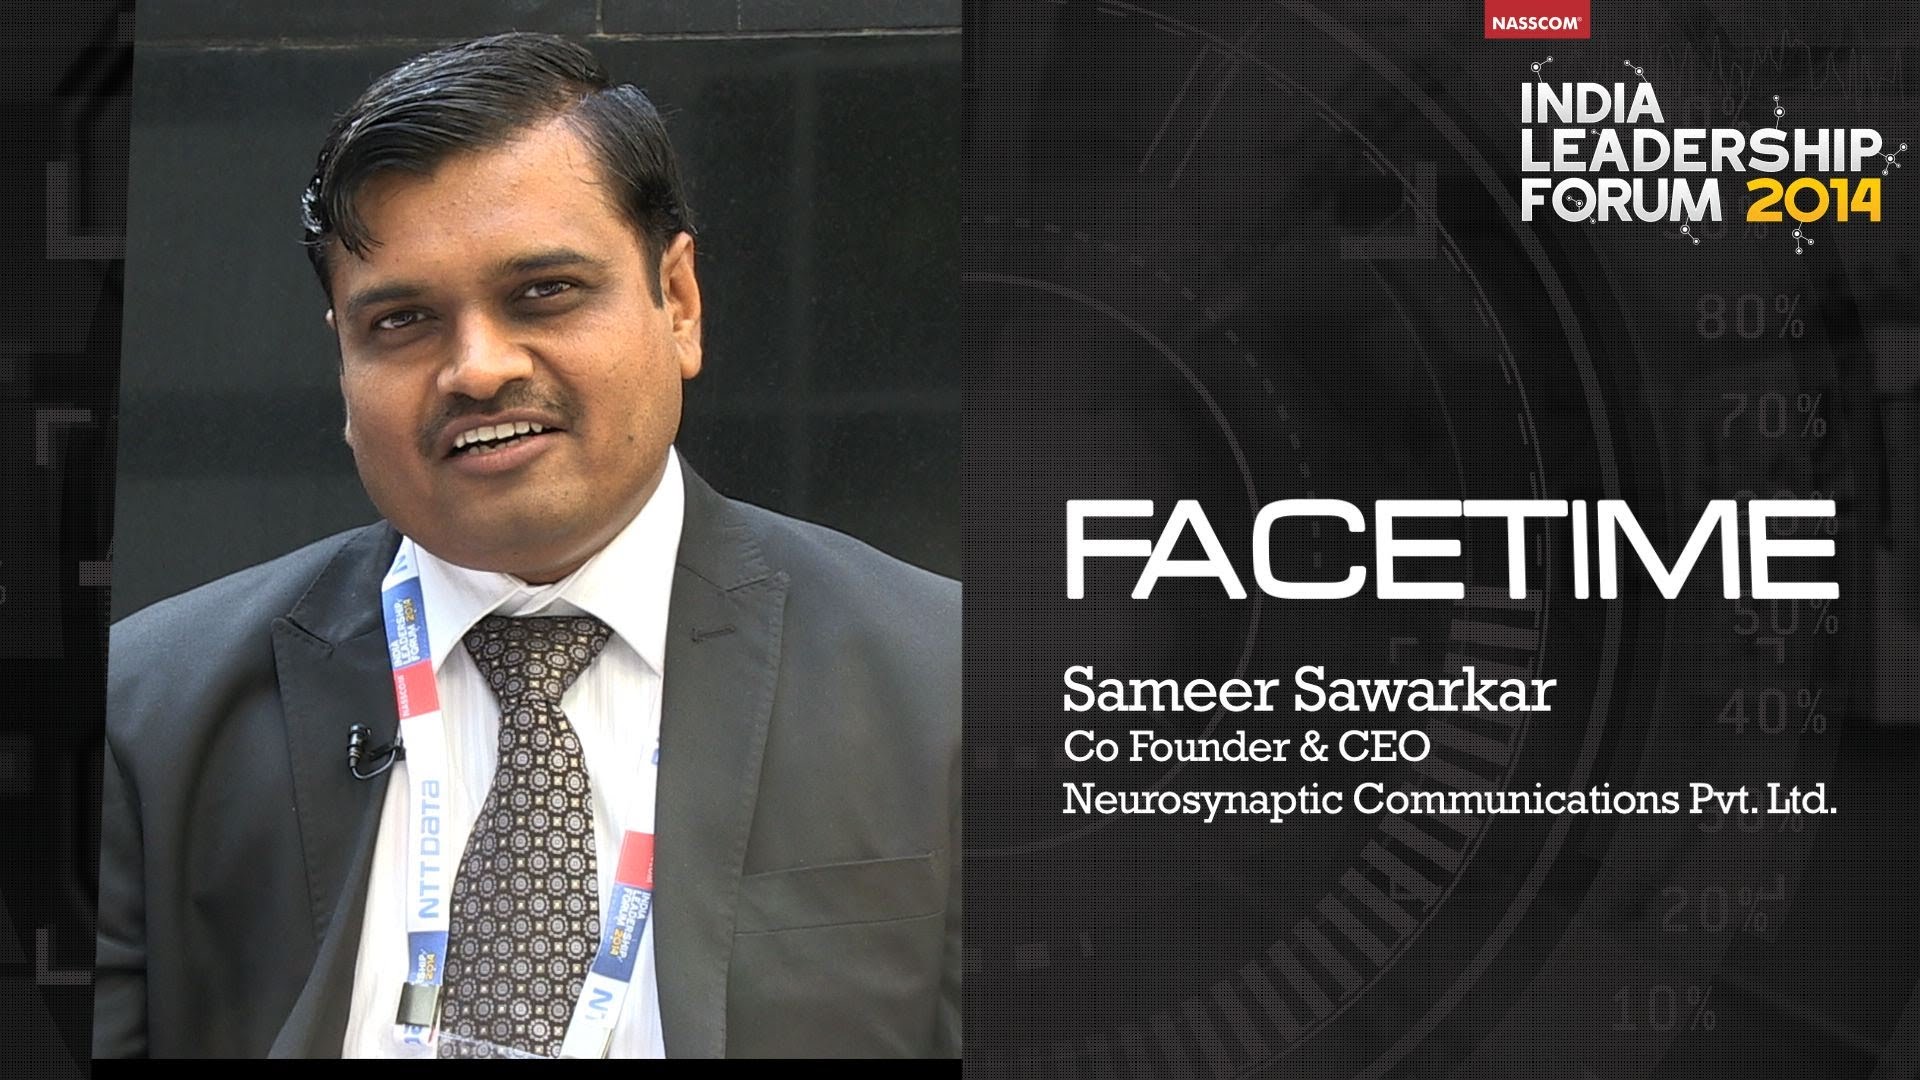 You are currently viewing Sameer Sawarkar, Co Founder & CEO, Neurosynaptic Communications Pvt. Ltd.